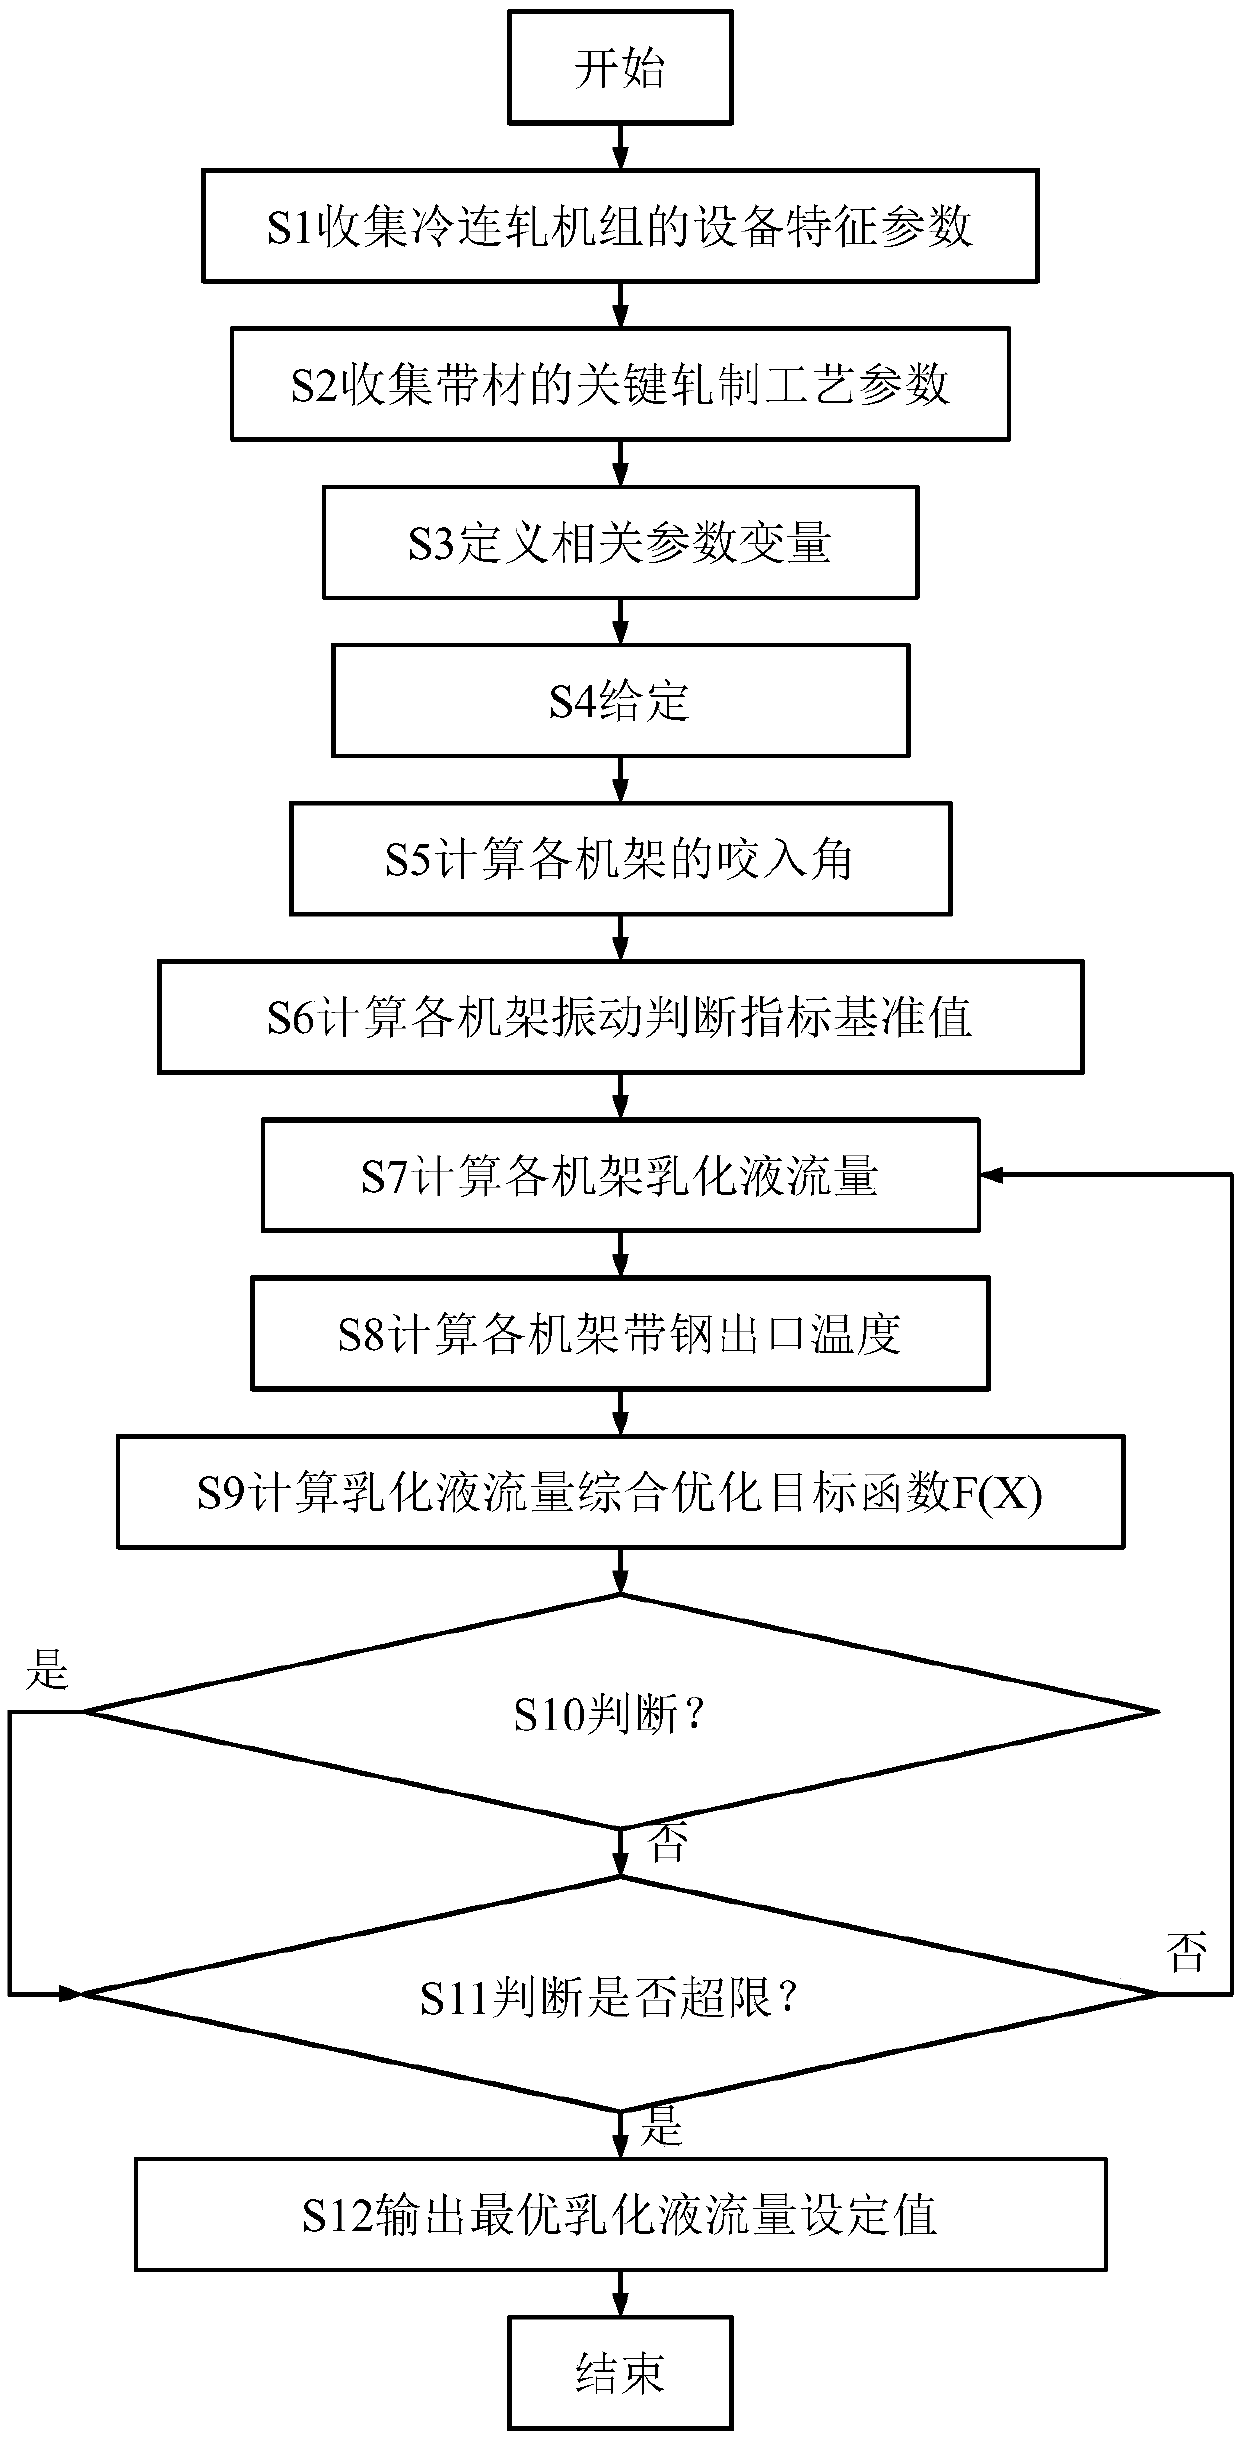 Emulsion flow optimization method for inhibiting vibration of cold continuous rolling unit